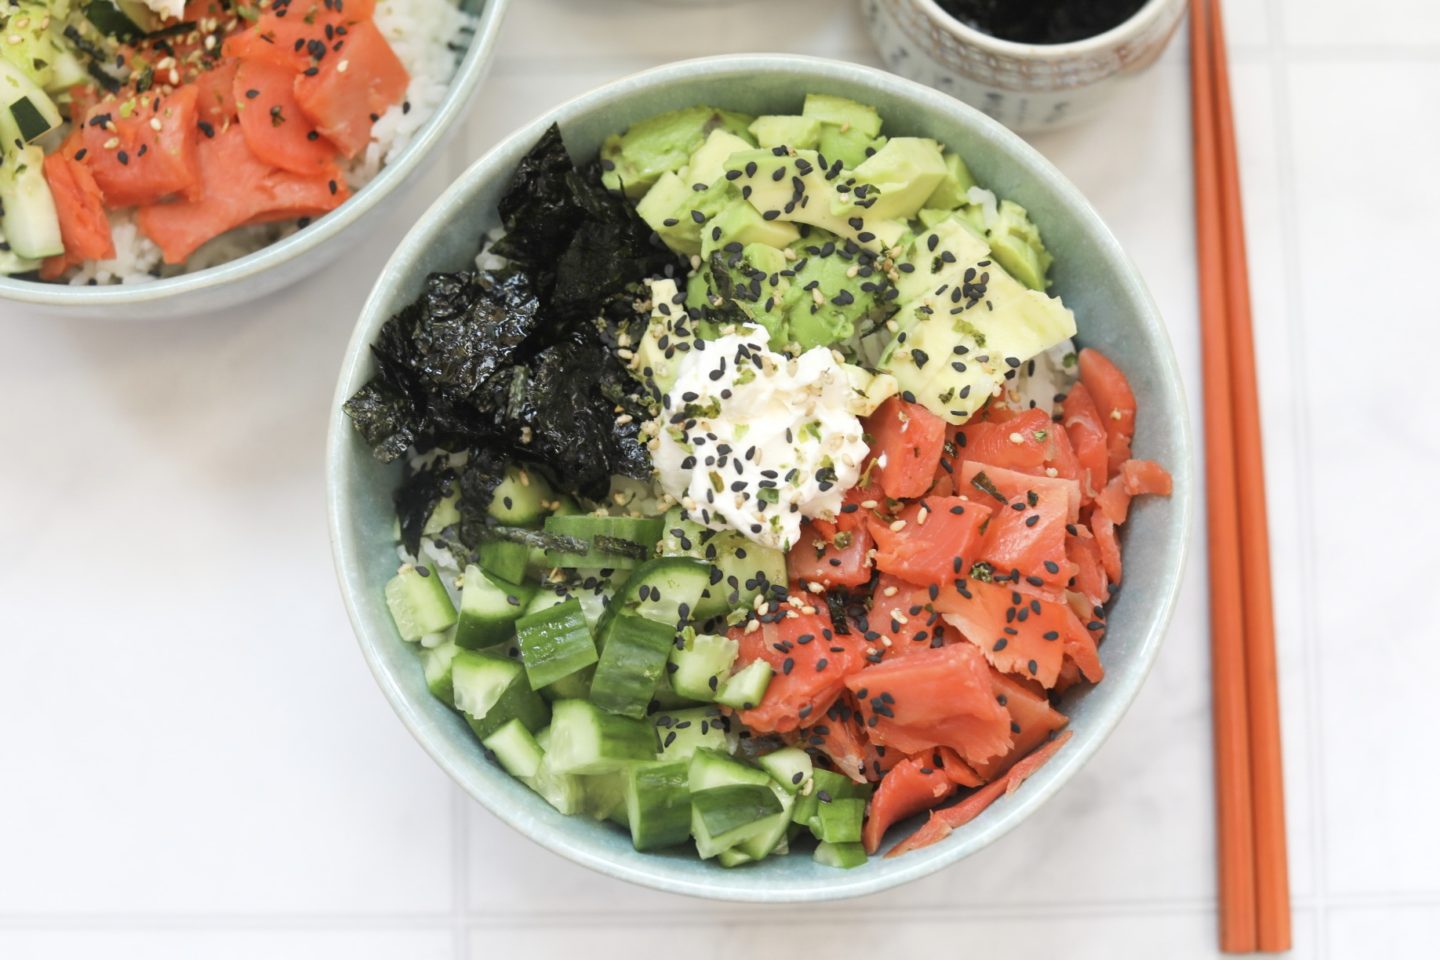 2 Philly Roll Sushi Bowls filled with smoked salmon, cream cheese, avocado, cucumber and nori sheets. Tan colored chopsticks on the right side of the bowl and a small grey bowl filled with soy sauce for styling purporses. 